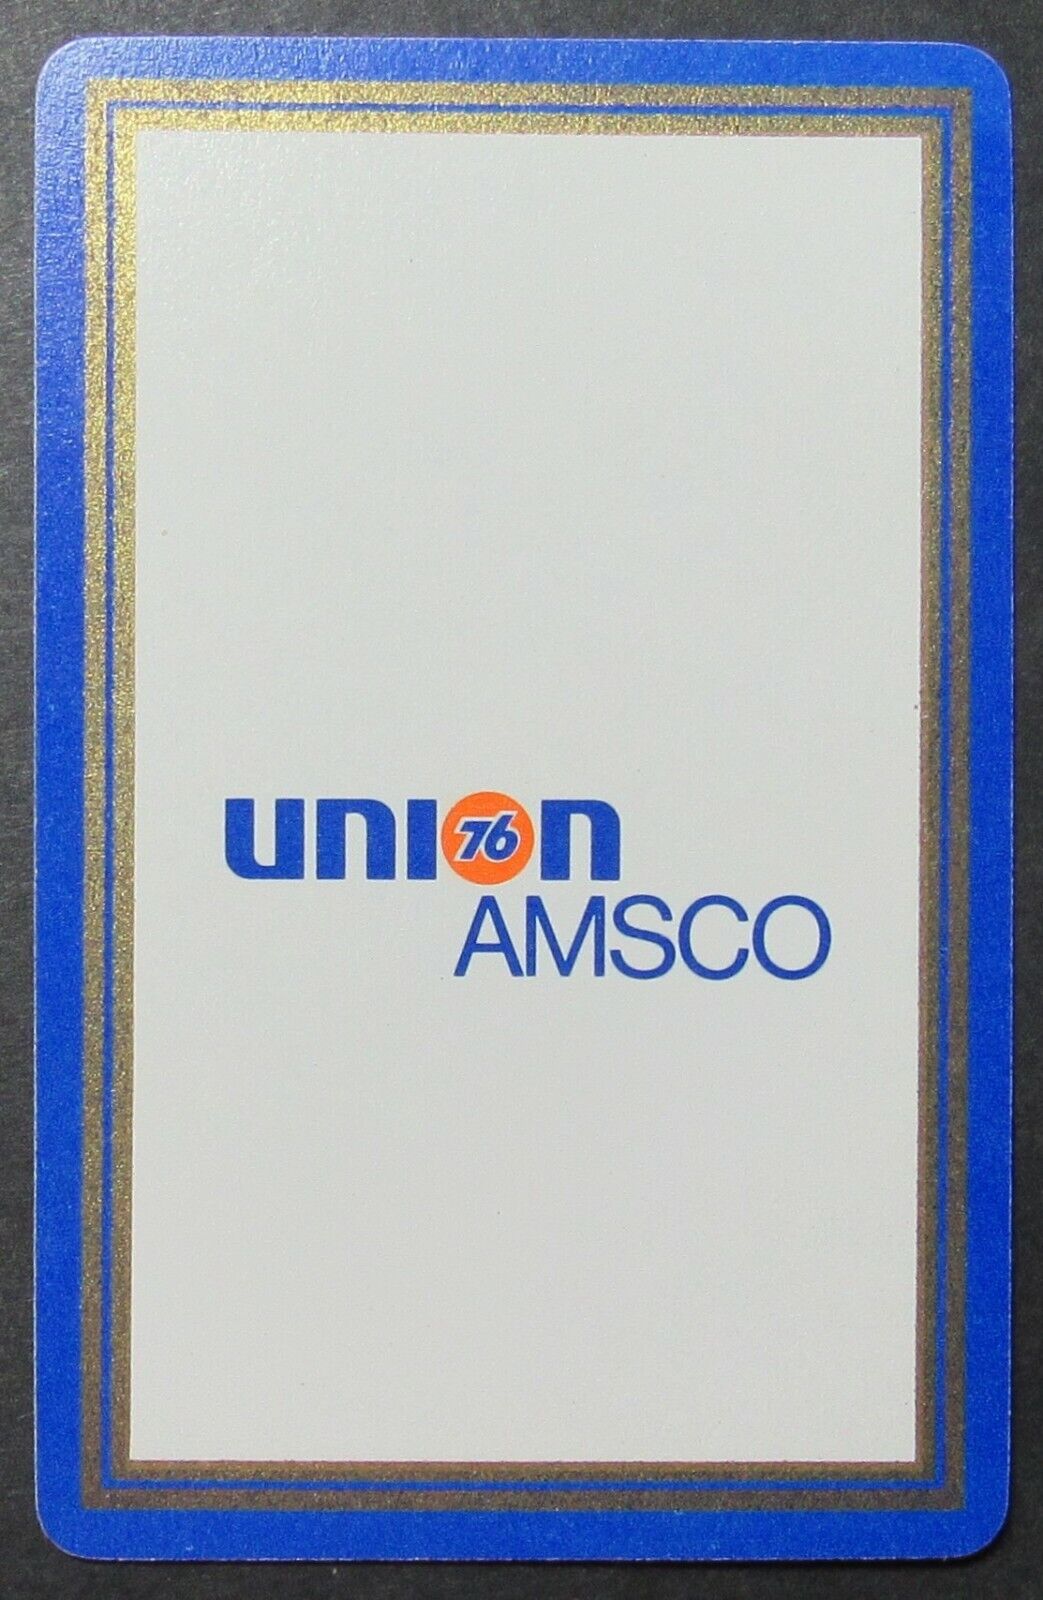 Union 76 AMSCO Ad Single Swap Playing Card Ace of Spades 